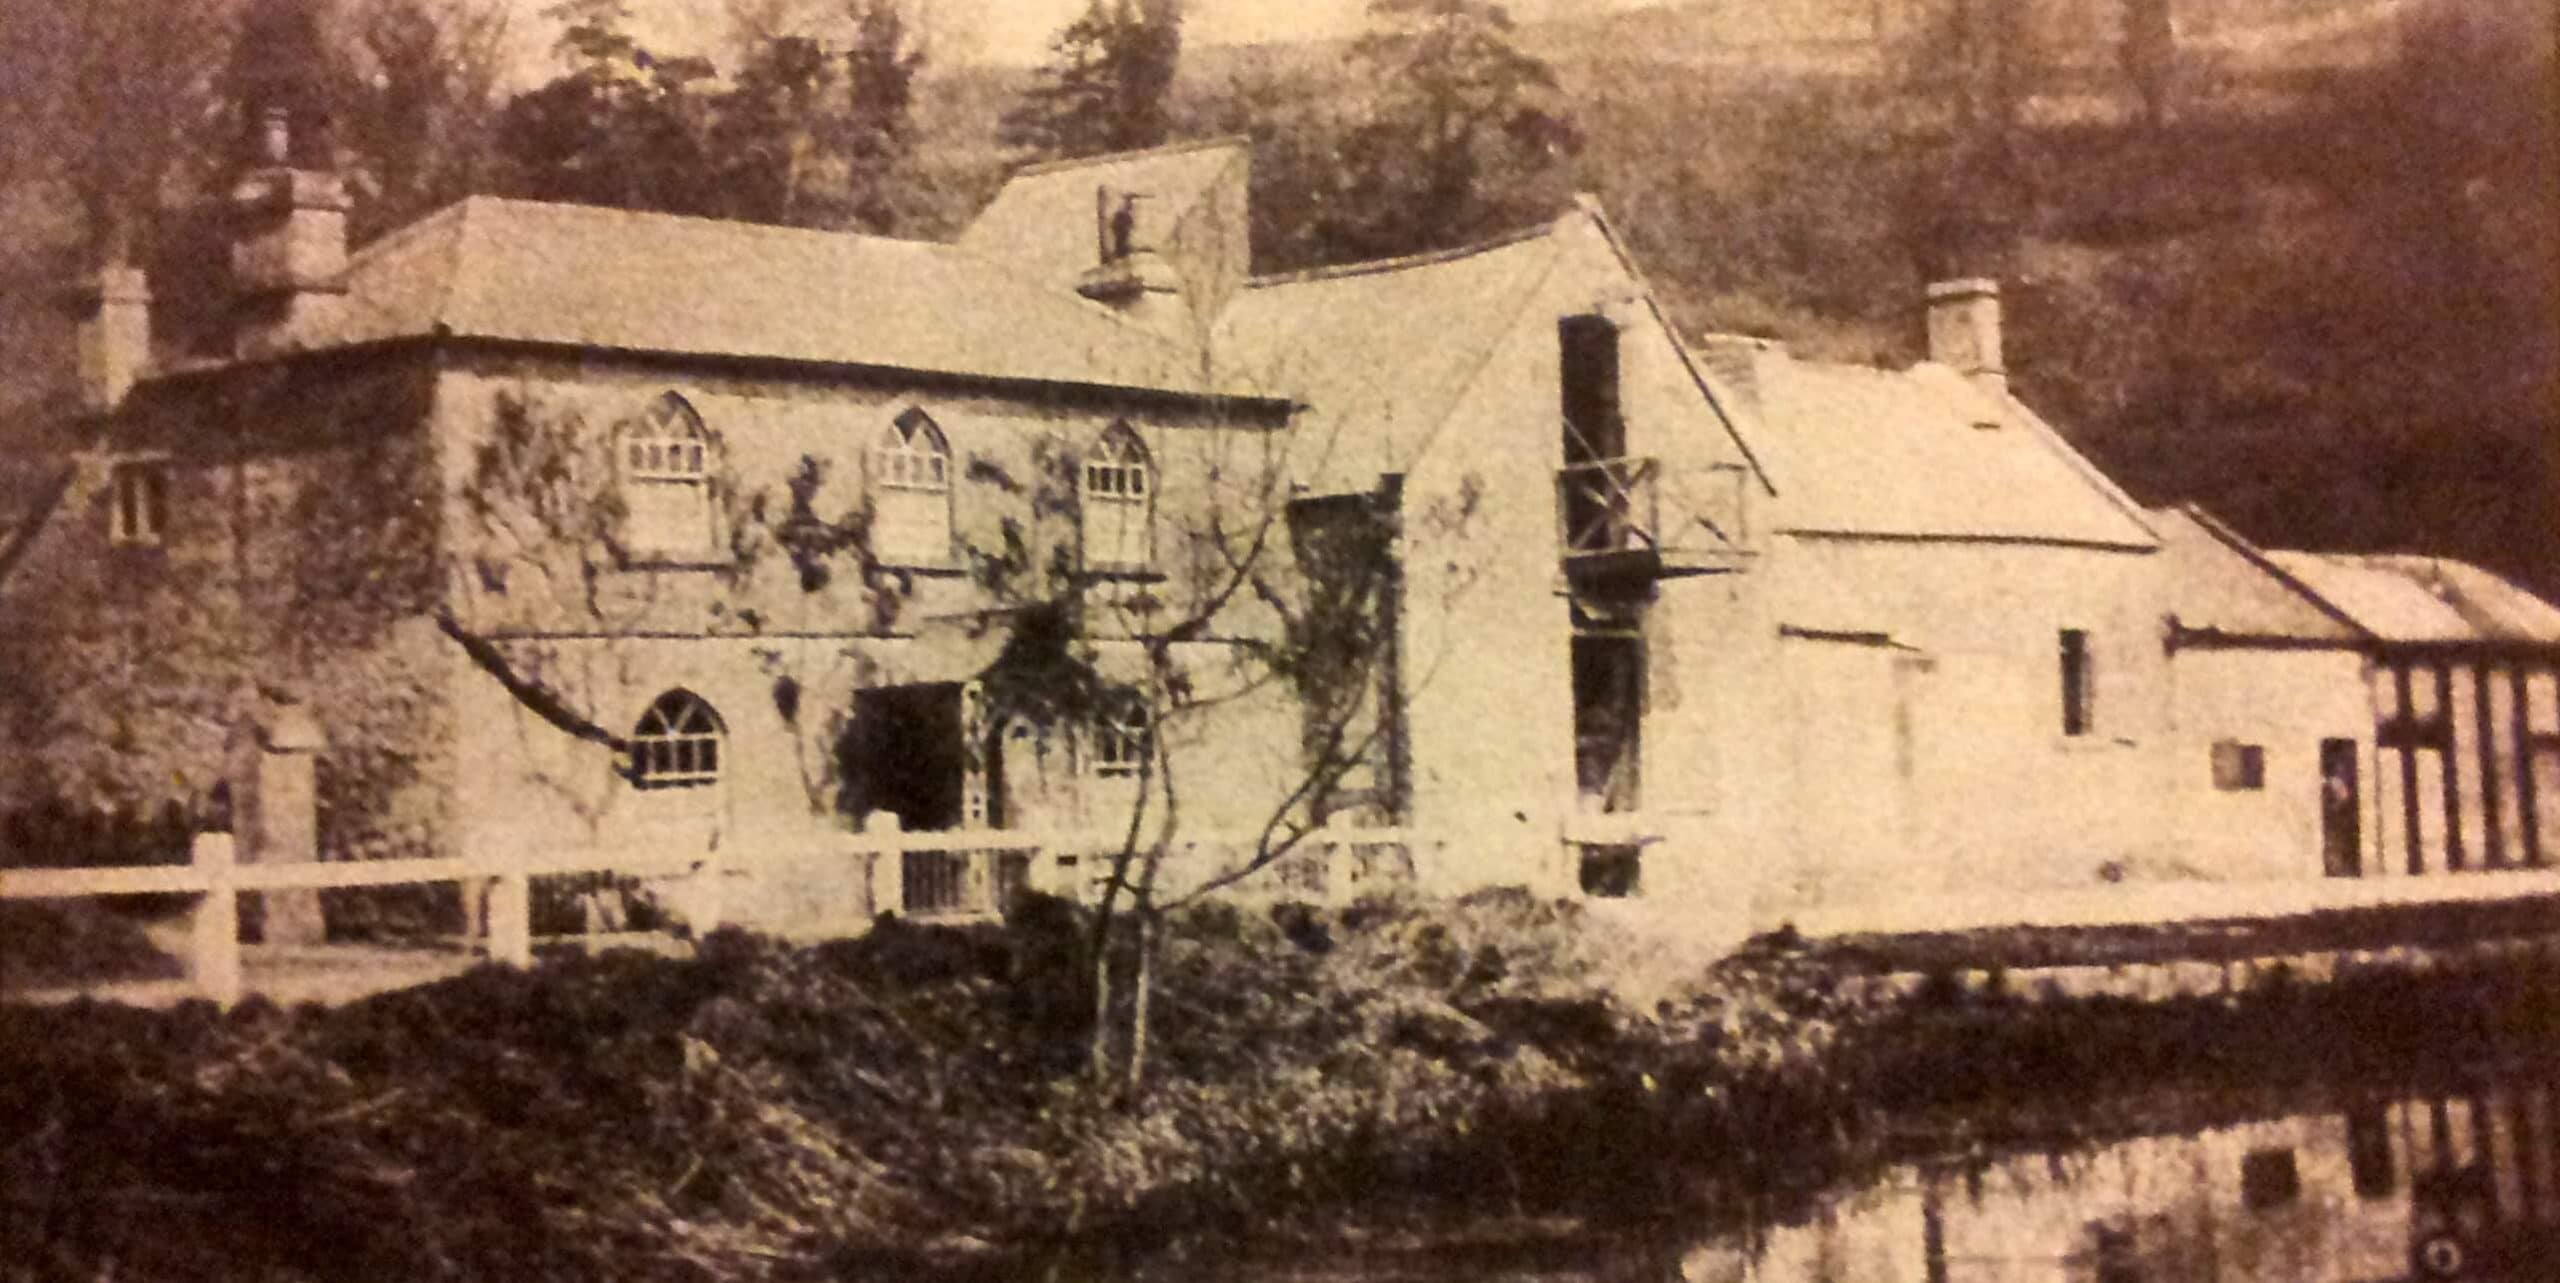 Tucking Mill about 1905 showing the Fuller;s earth factory beside the cottage